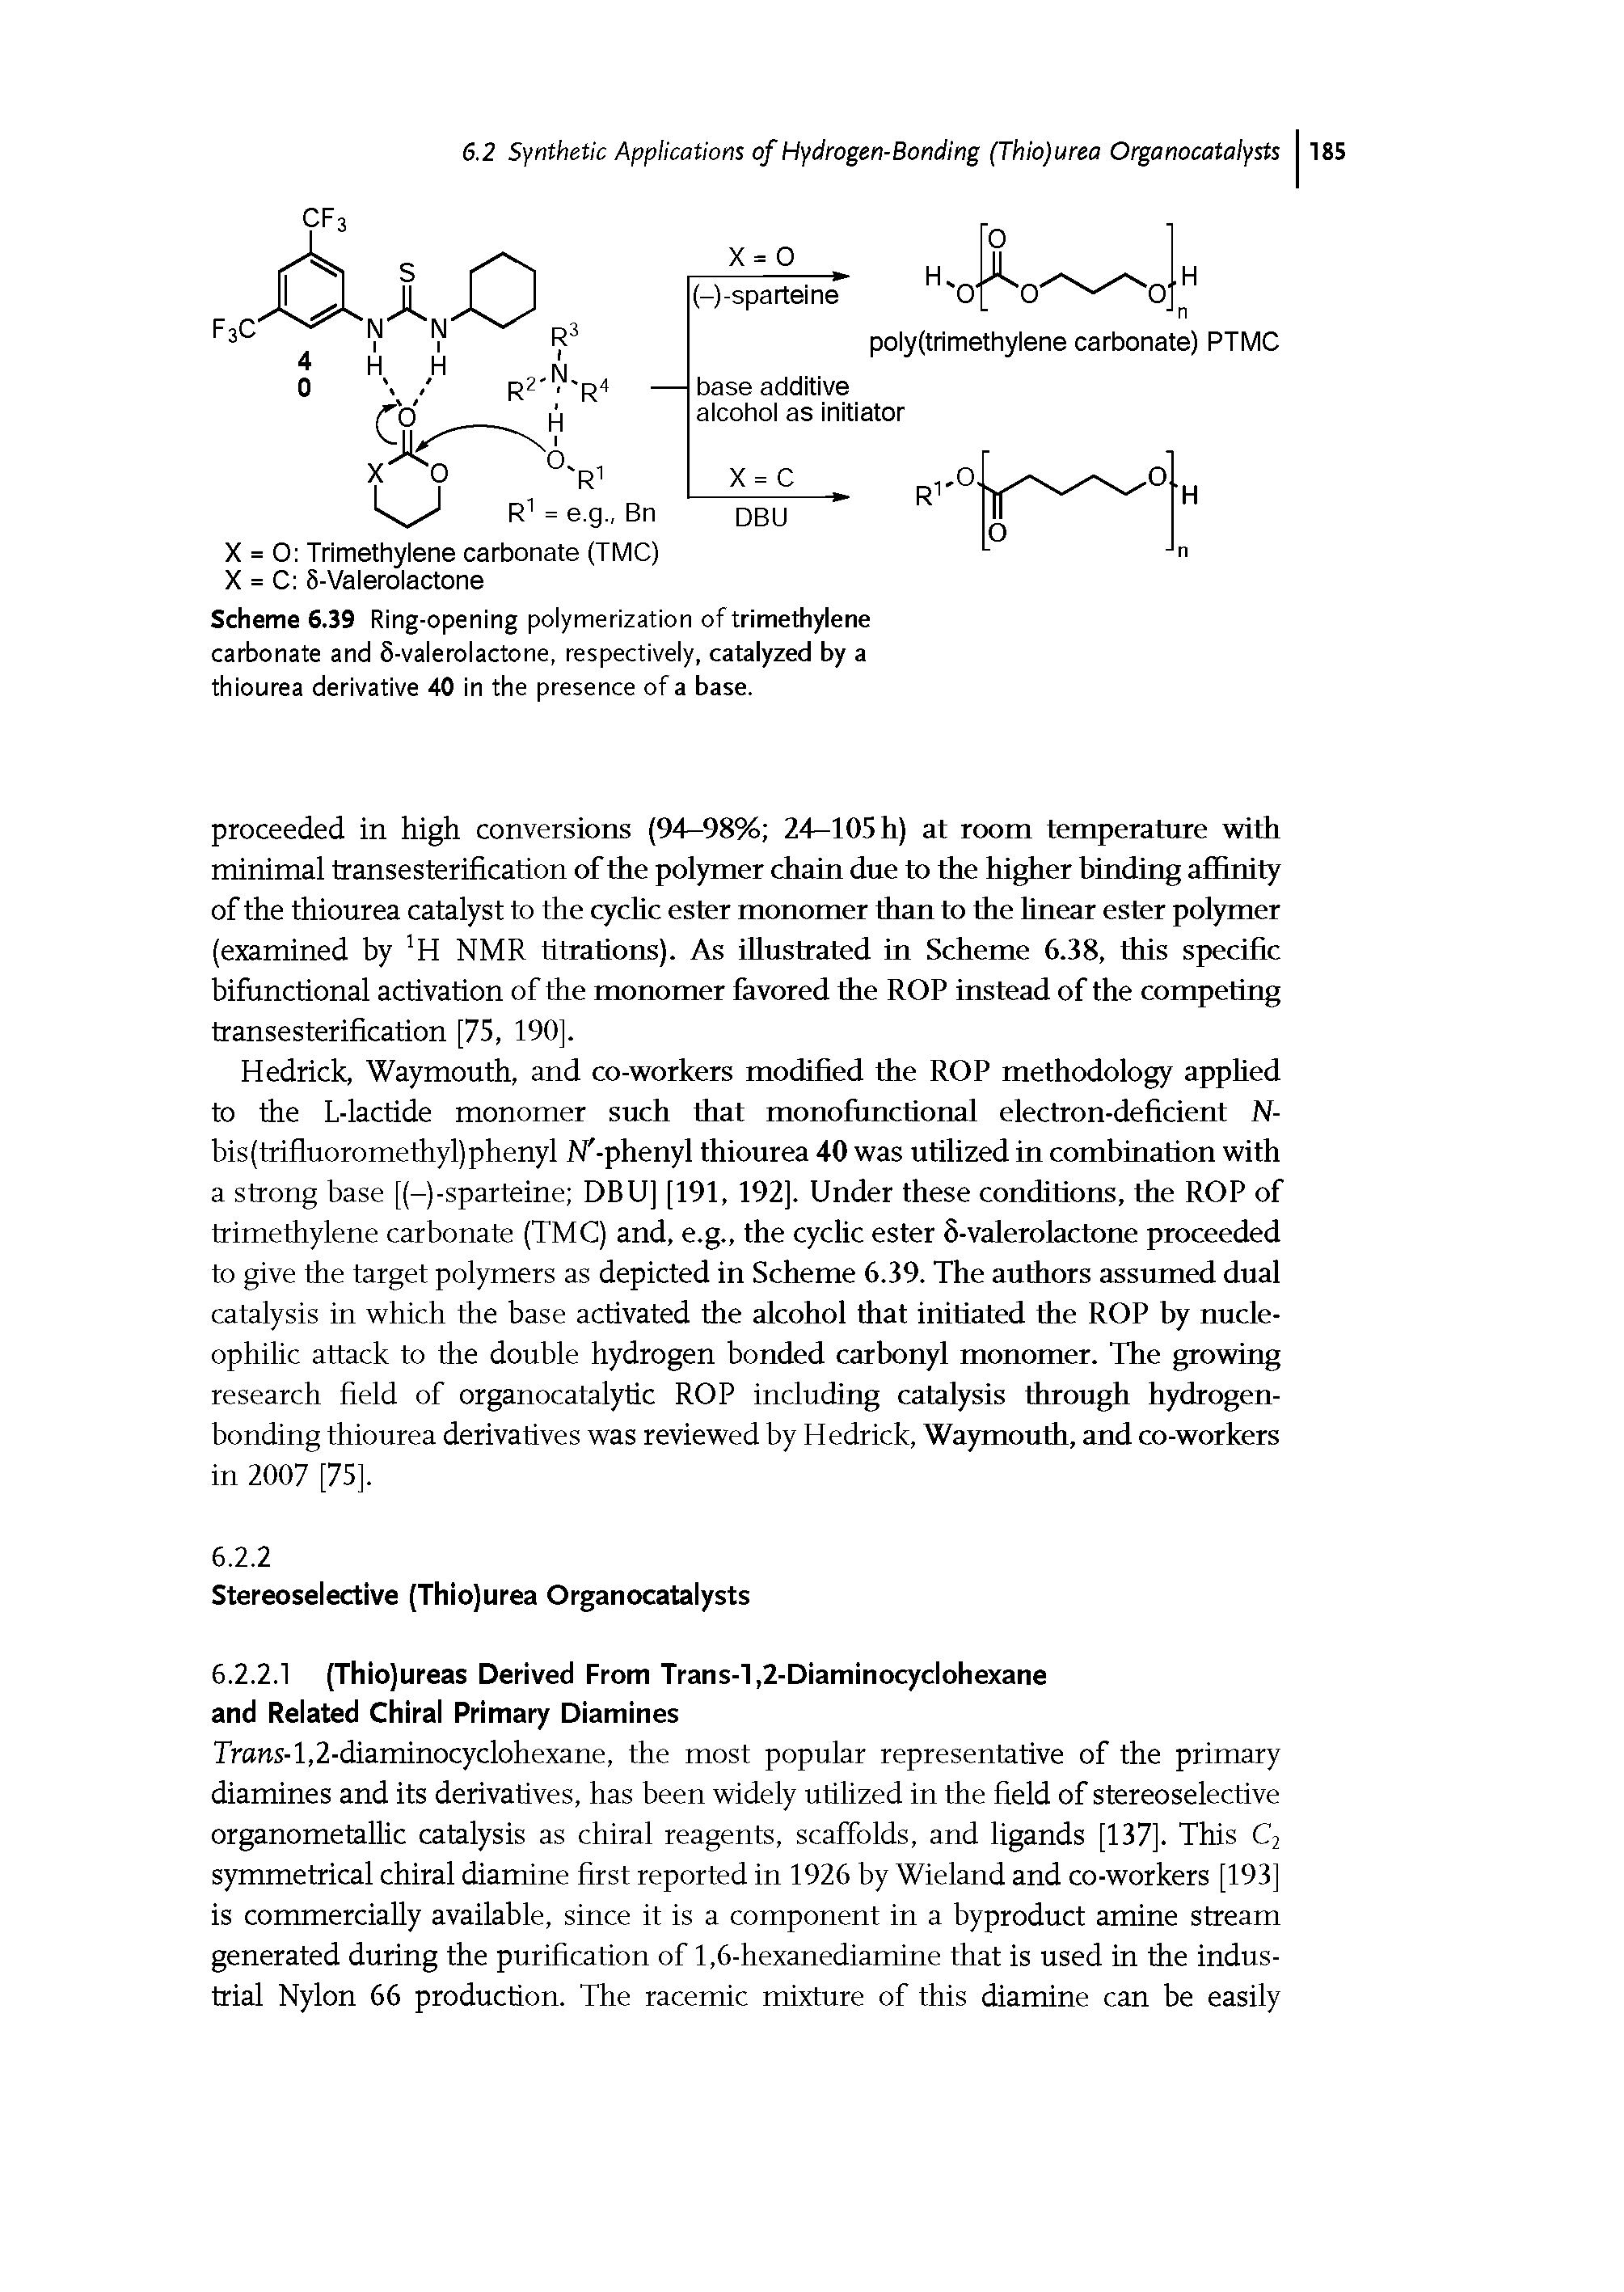 Scheme 6.39 Ring-opening poiymerization of trimethylene carbonate and 5-vaieroiactone, respectiveiy, catalyzed by a thiourea derivative 40 in the presence of a base.